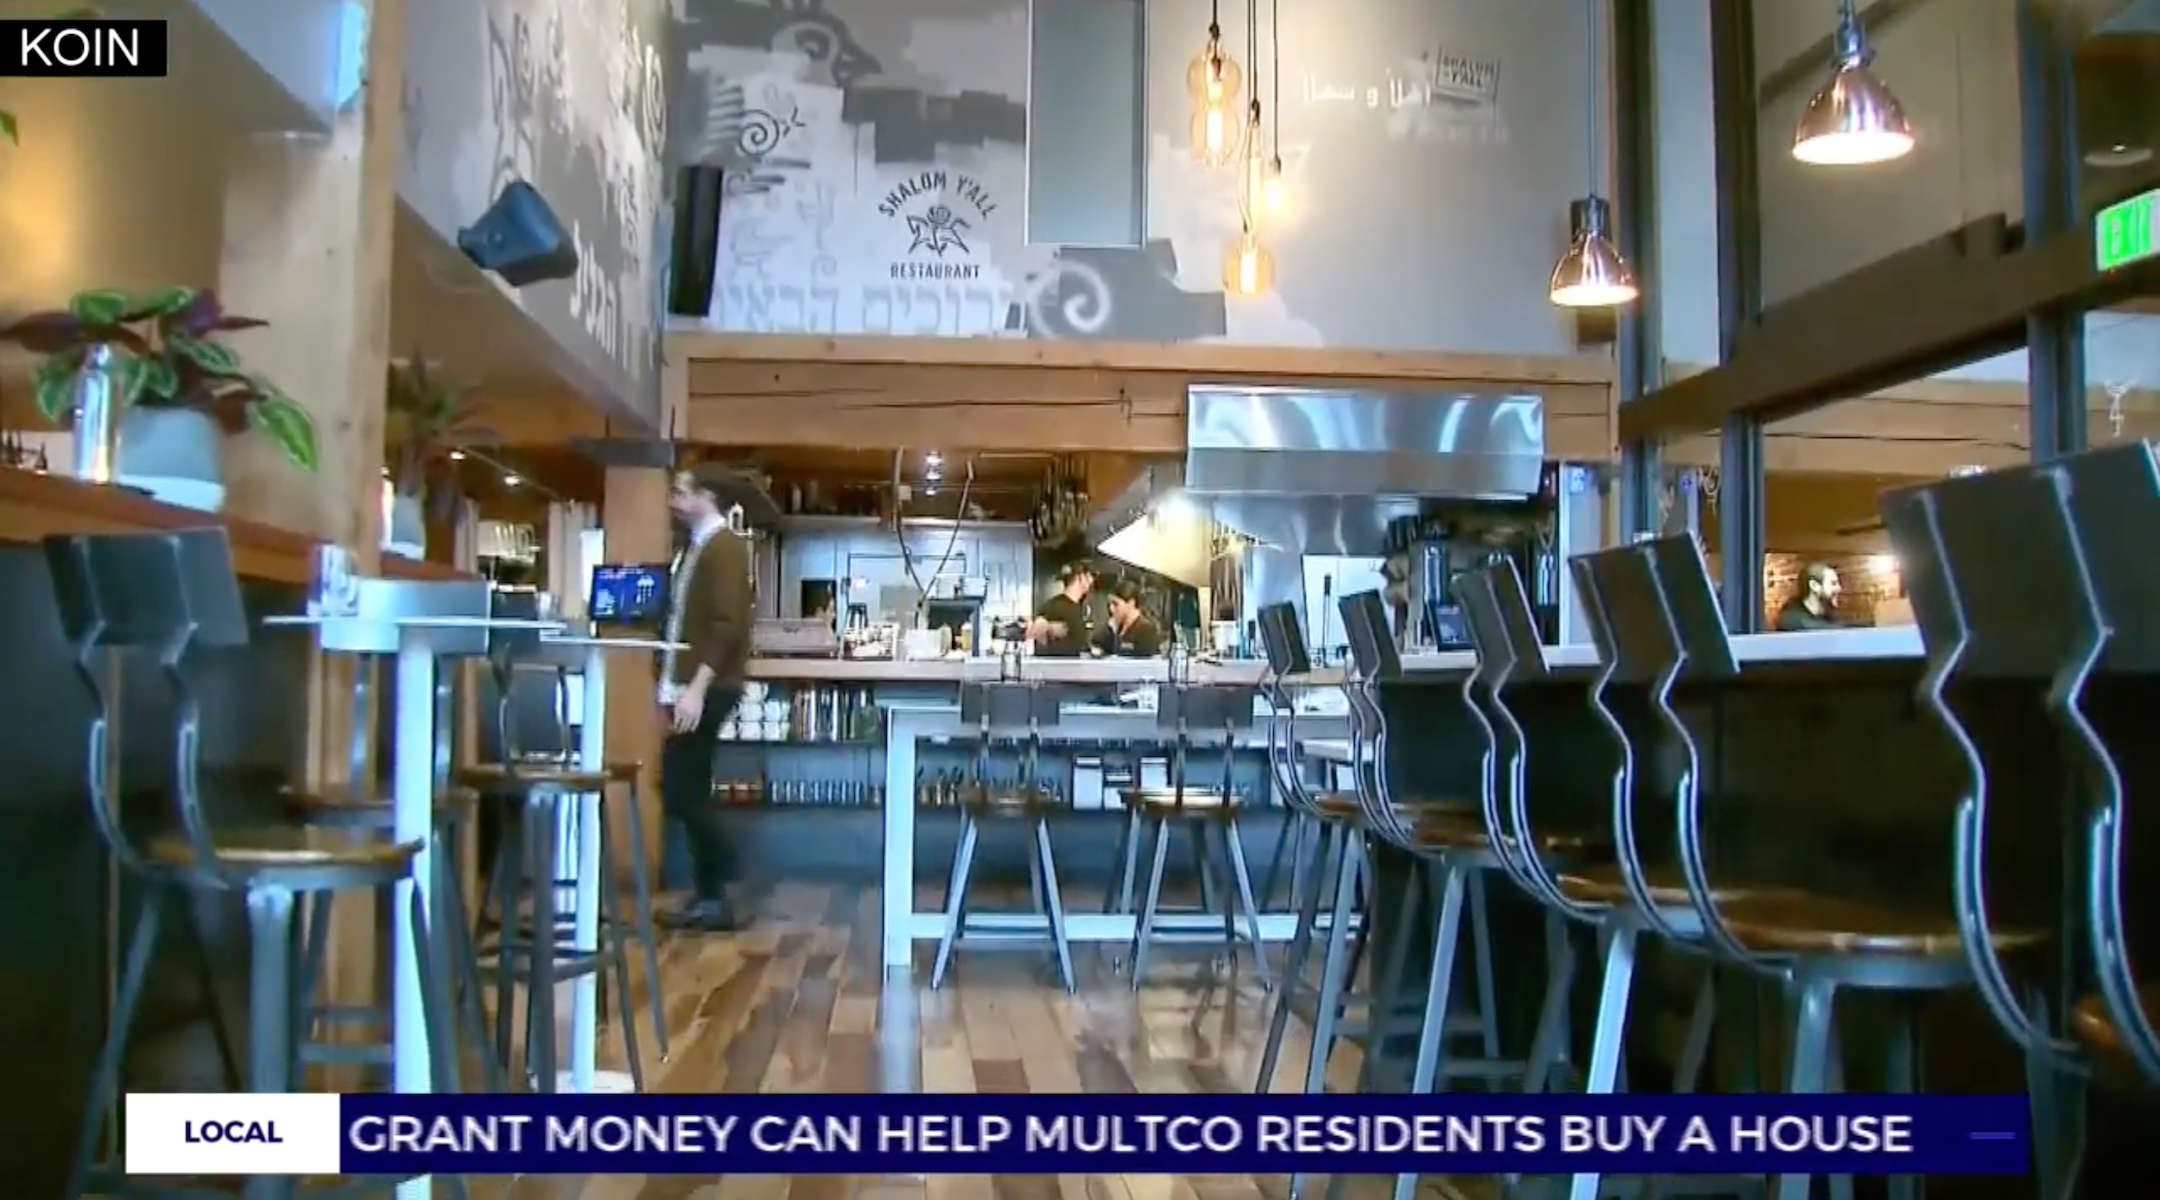 The interior of a Shalom Y'all location in Portland, shown in a 2019 newscast. (Screenshot from YouTube)